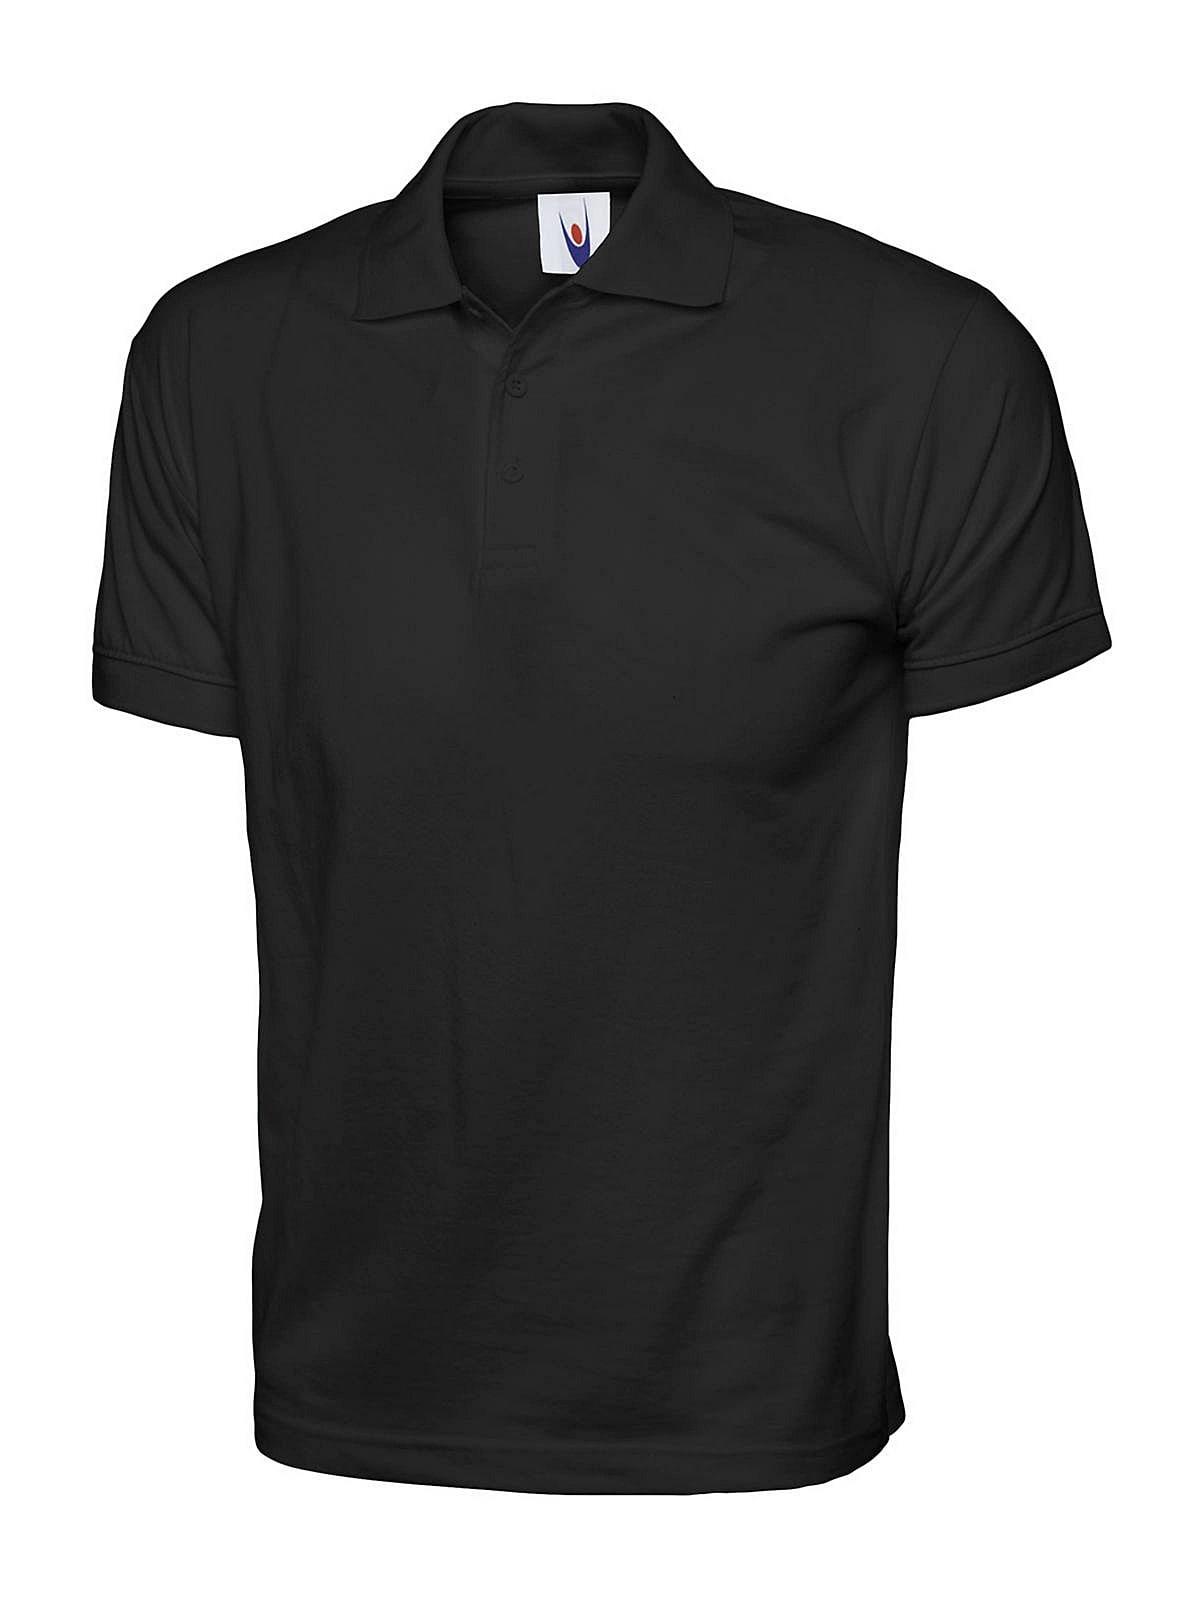 Uneek 200GSM Jersey Polo Shirt in Black (Product Code: UC122)